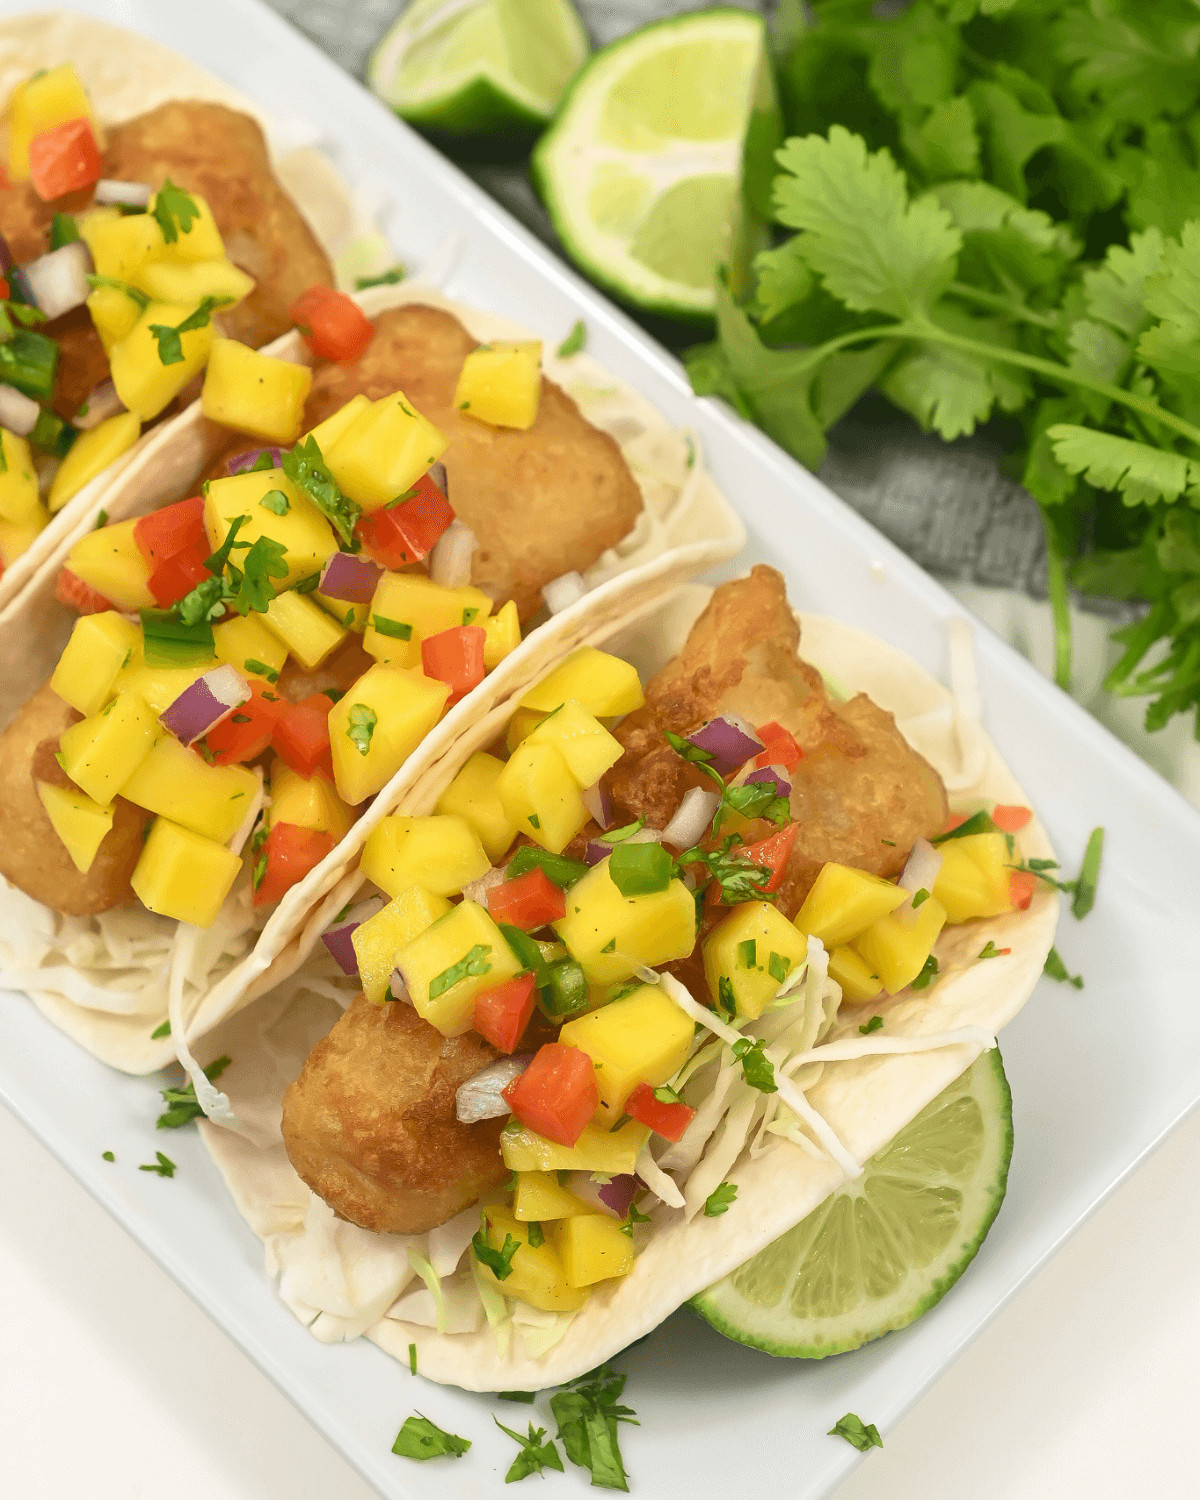 Fish tacos  with mango salsa, garnished with cilantro and lime wedges on a white plate.